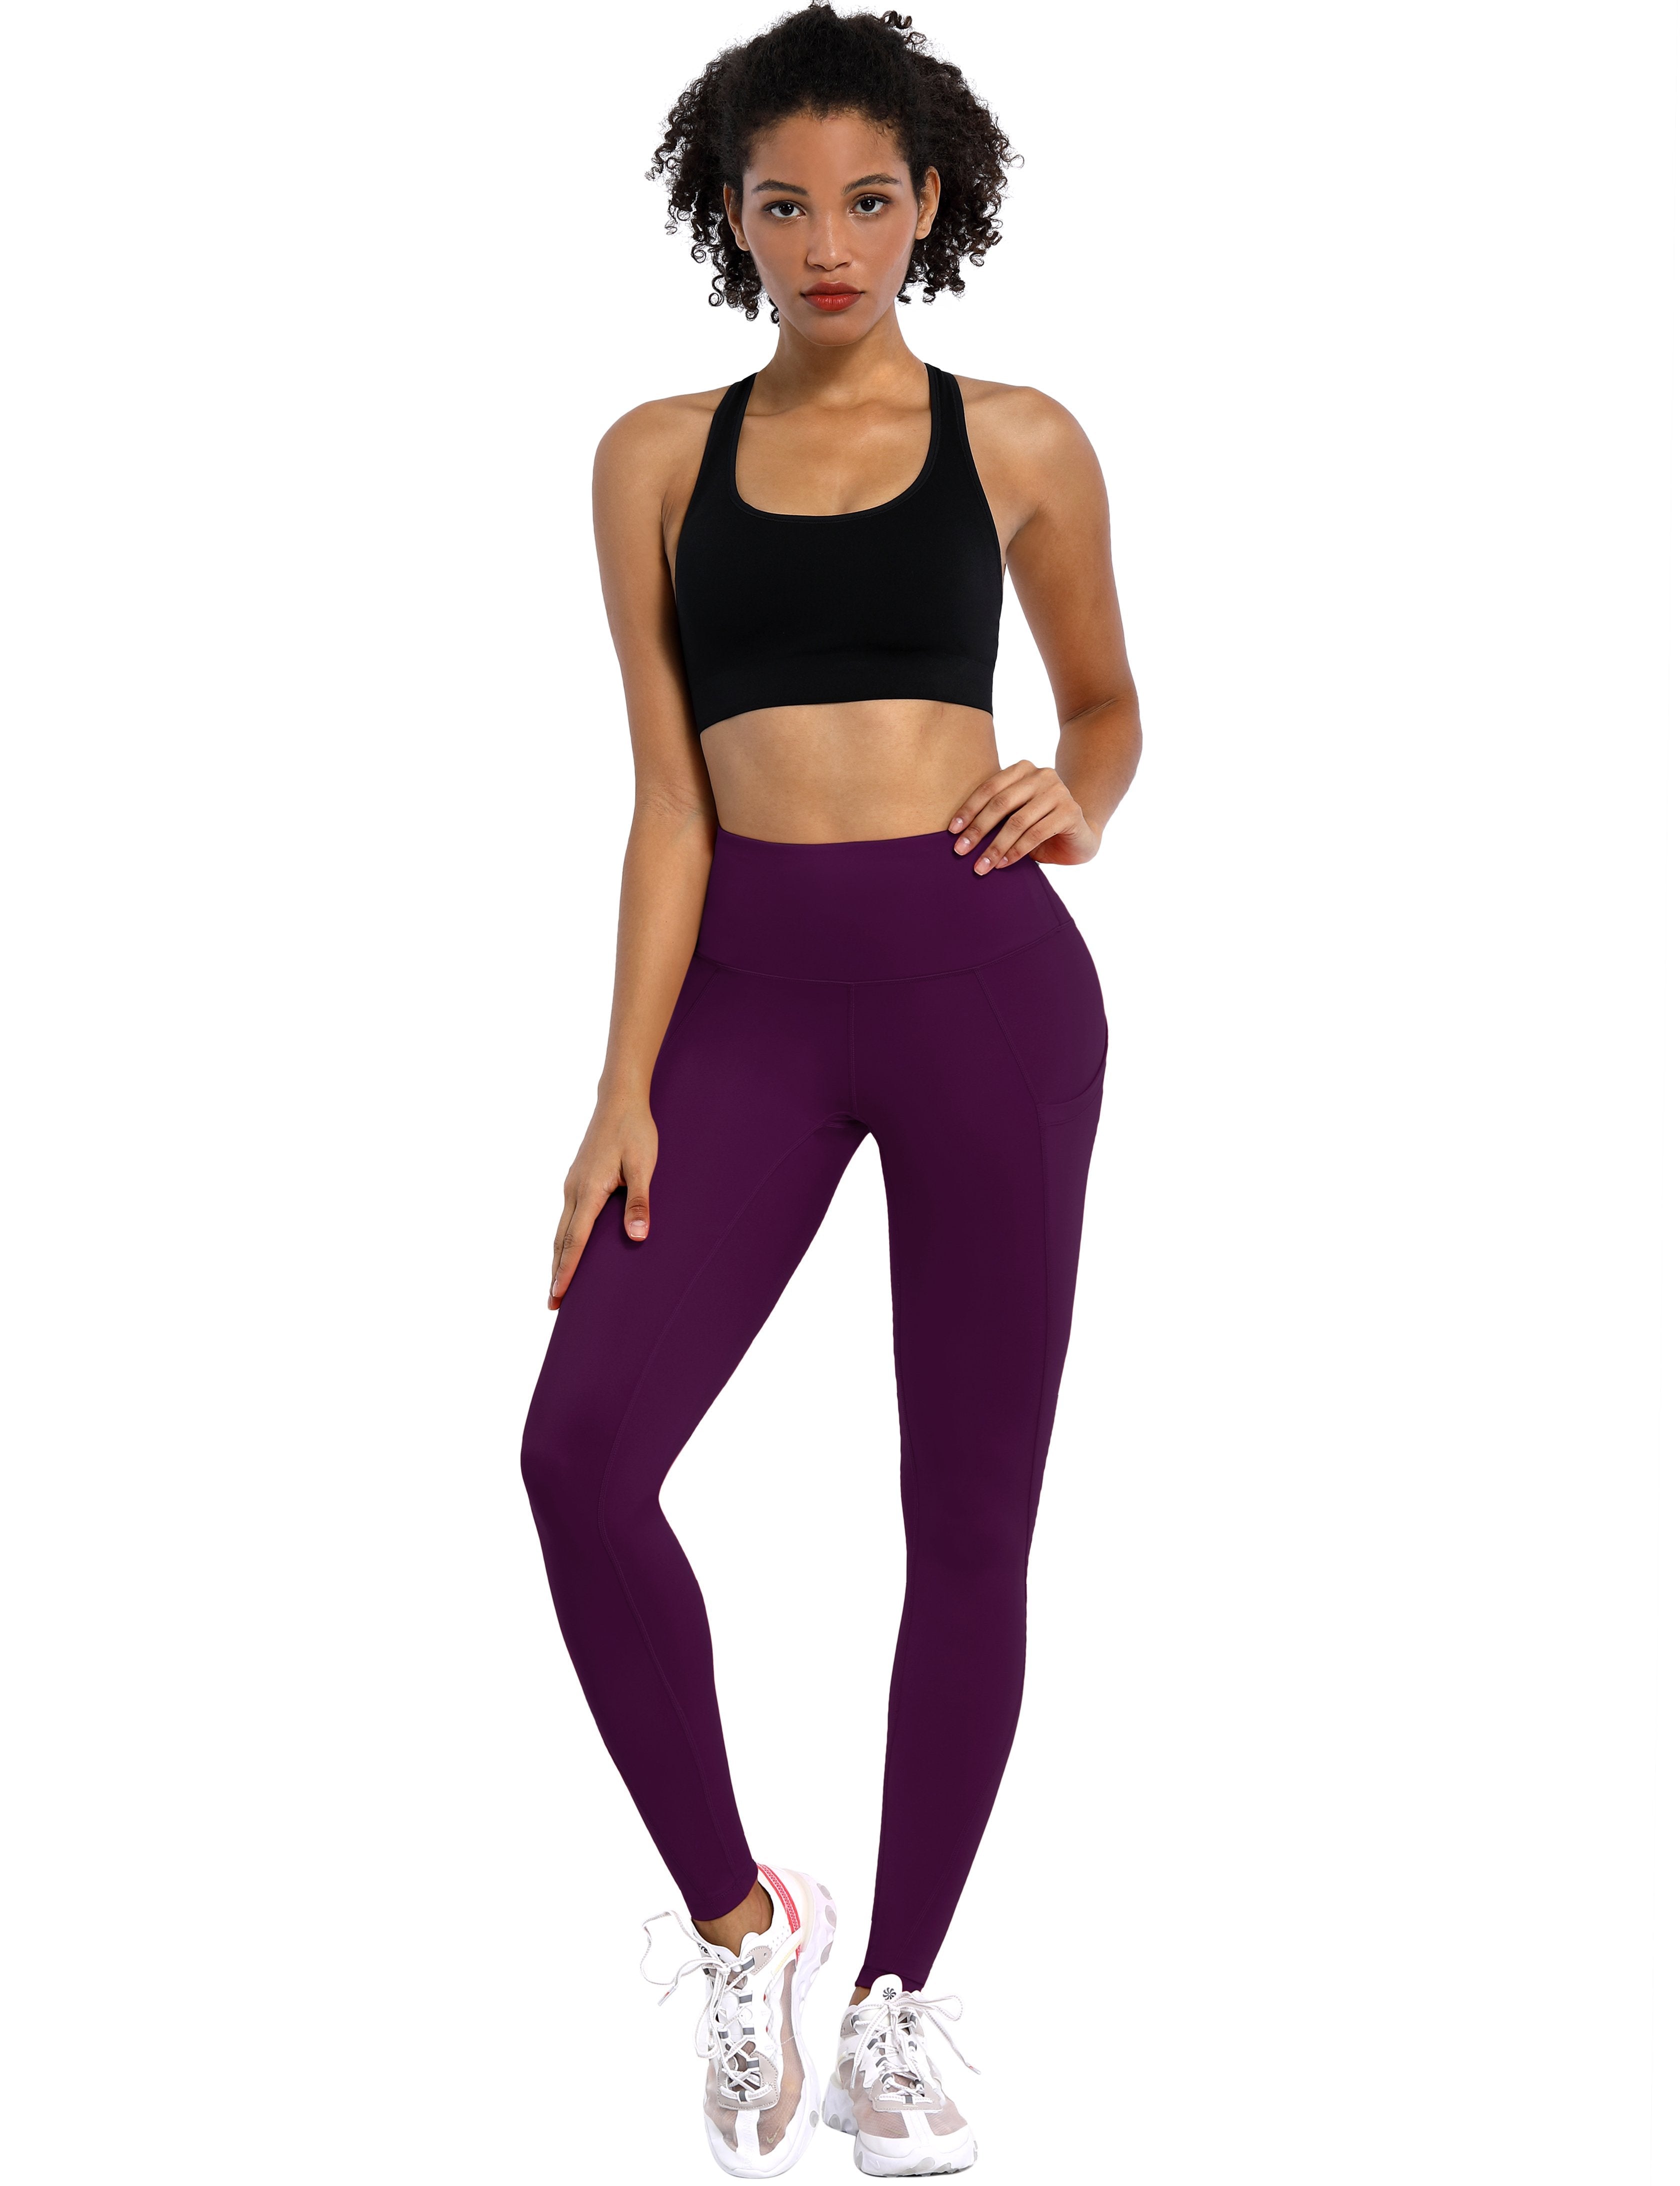 High Waist Side Pockets Yoga Pants plum 75% Nylon, 25% Spandex Fabric doesn't attract lint easily 4-way stretch No see-through Moisture-wicking Tummy control Inner pocket